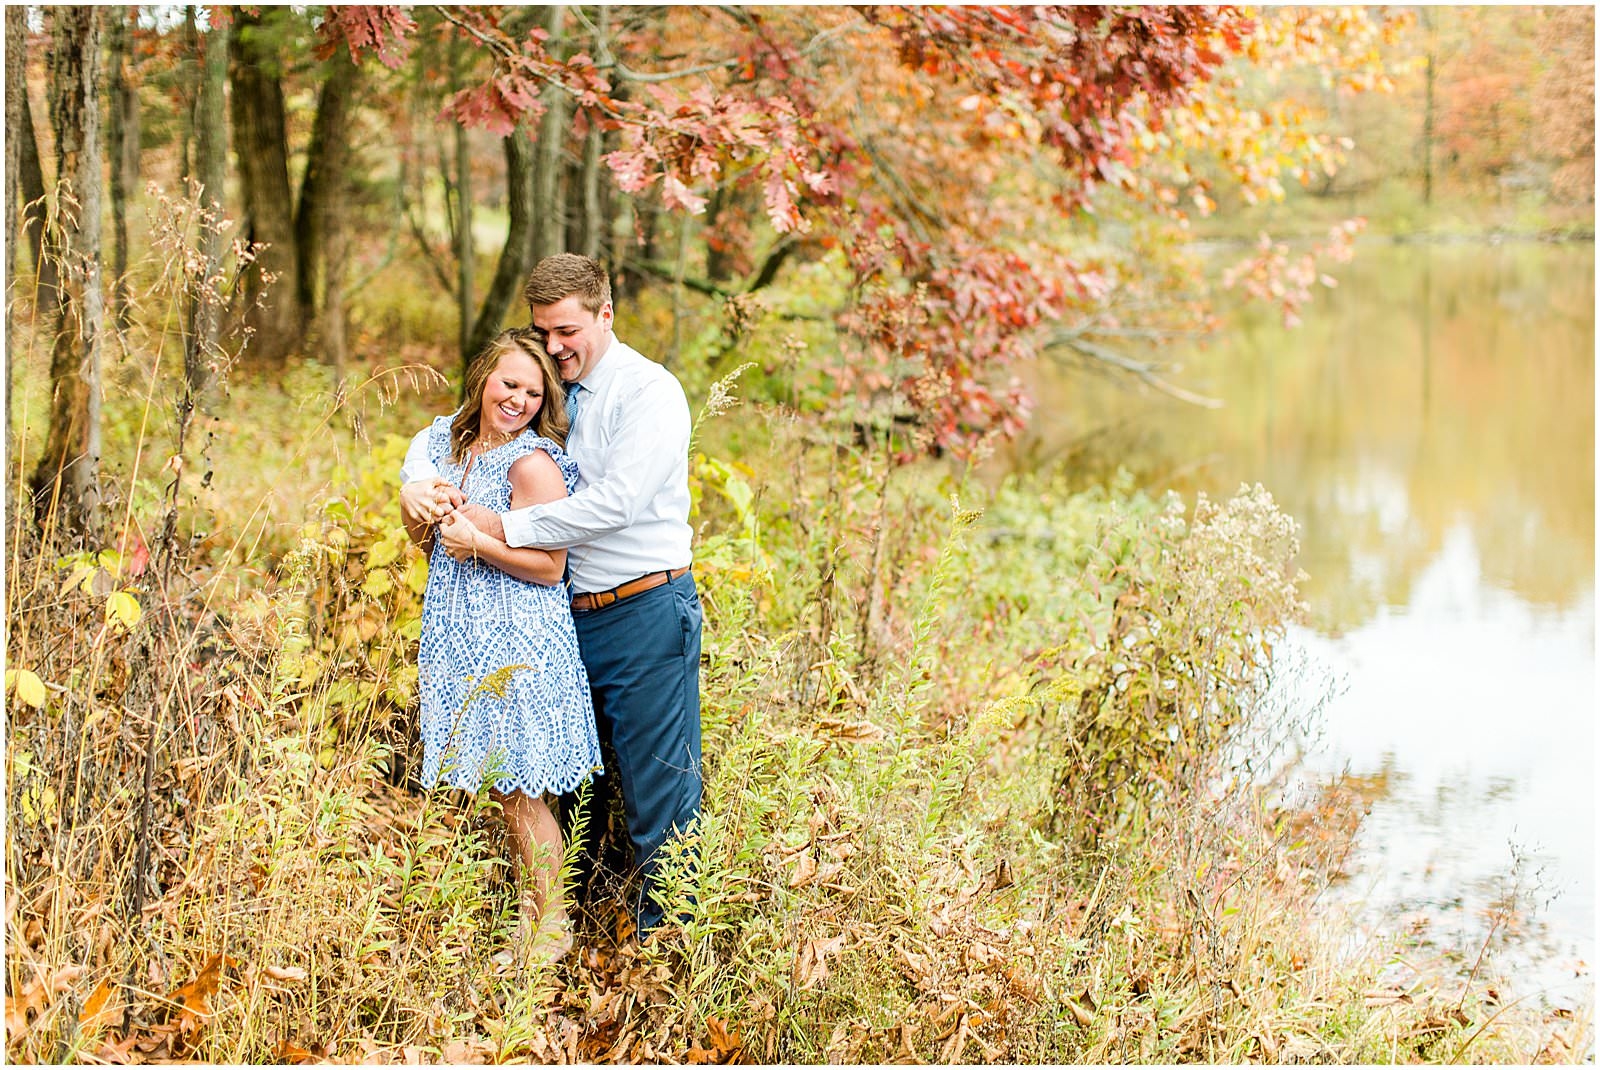 A Southern Illinois Engagement Session | Roxanne and Matthew | Bret and Brandie Photography 0004.jpg